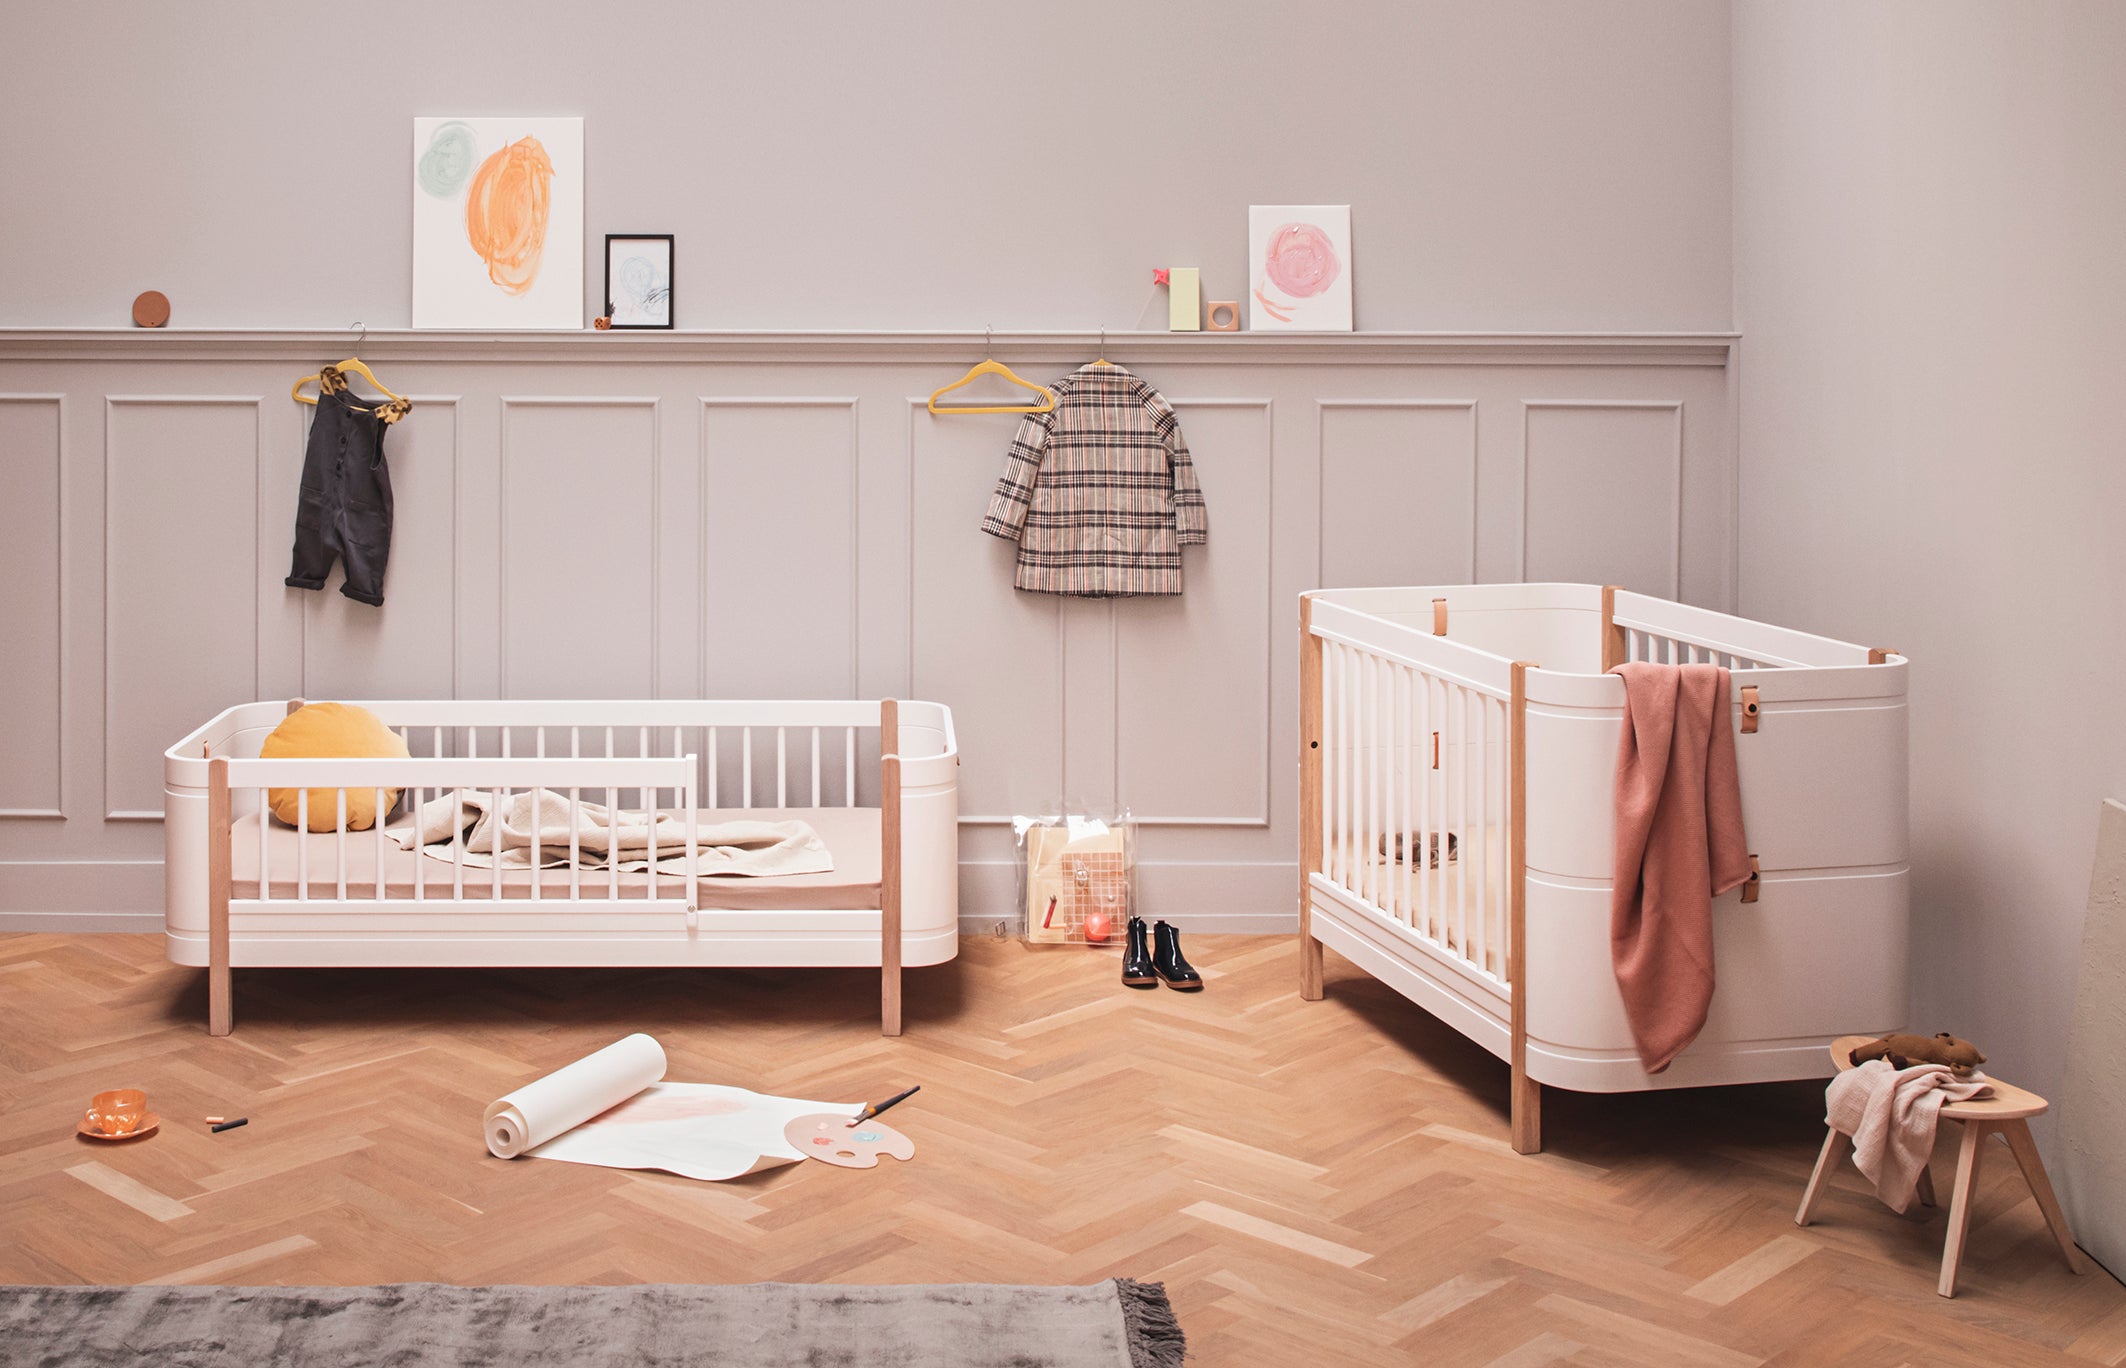 Oliver Furniture Mini+ sibling set (Mini+ baby bed and Mini+ junior bed), white-oak and white